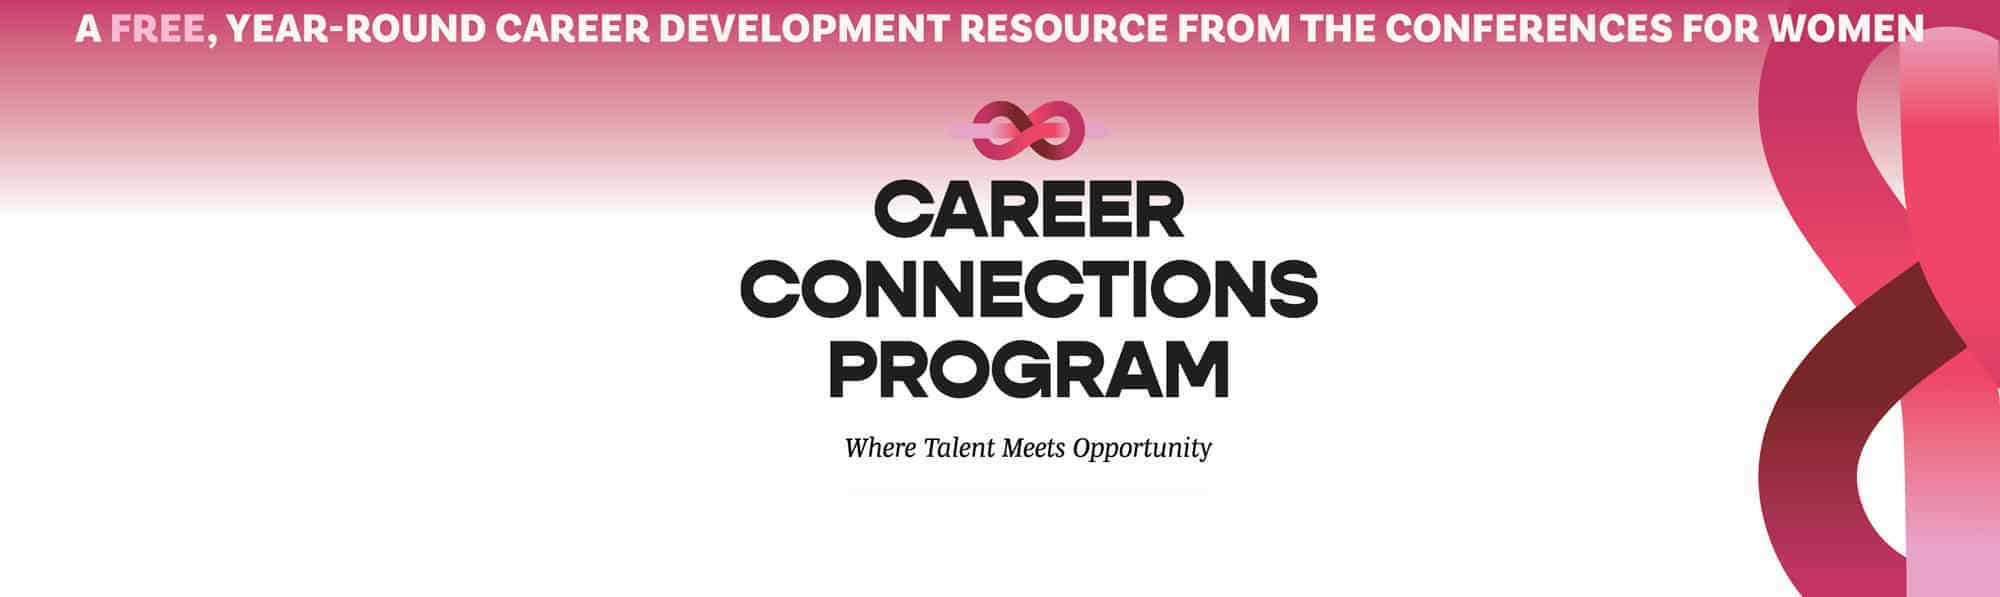 Introducing the Career Connections Program, a FREE year-round career development resource from the Conferences for Women!